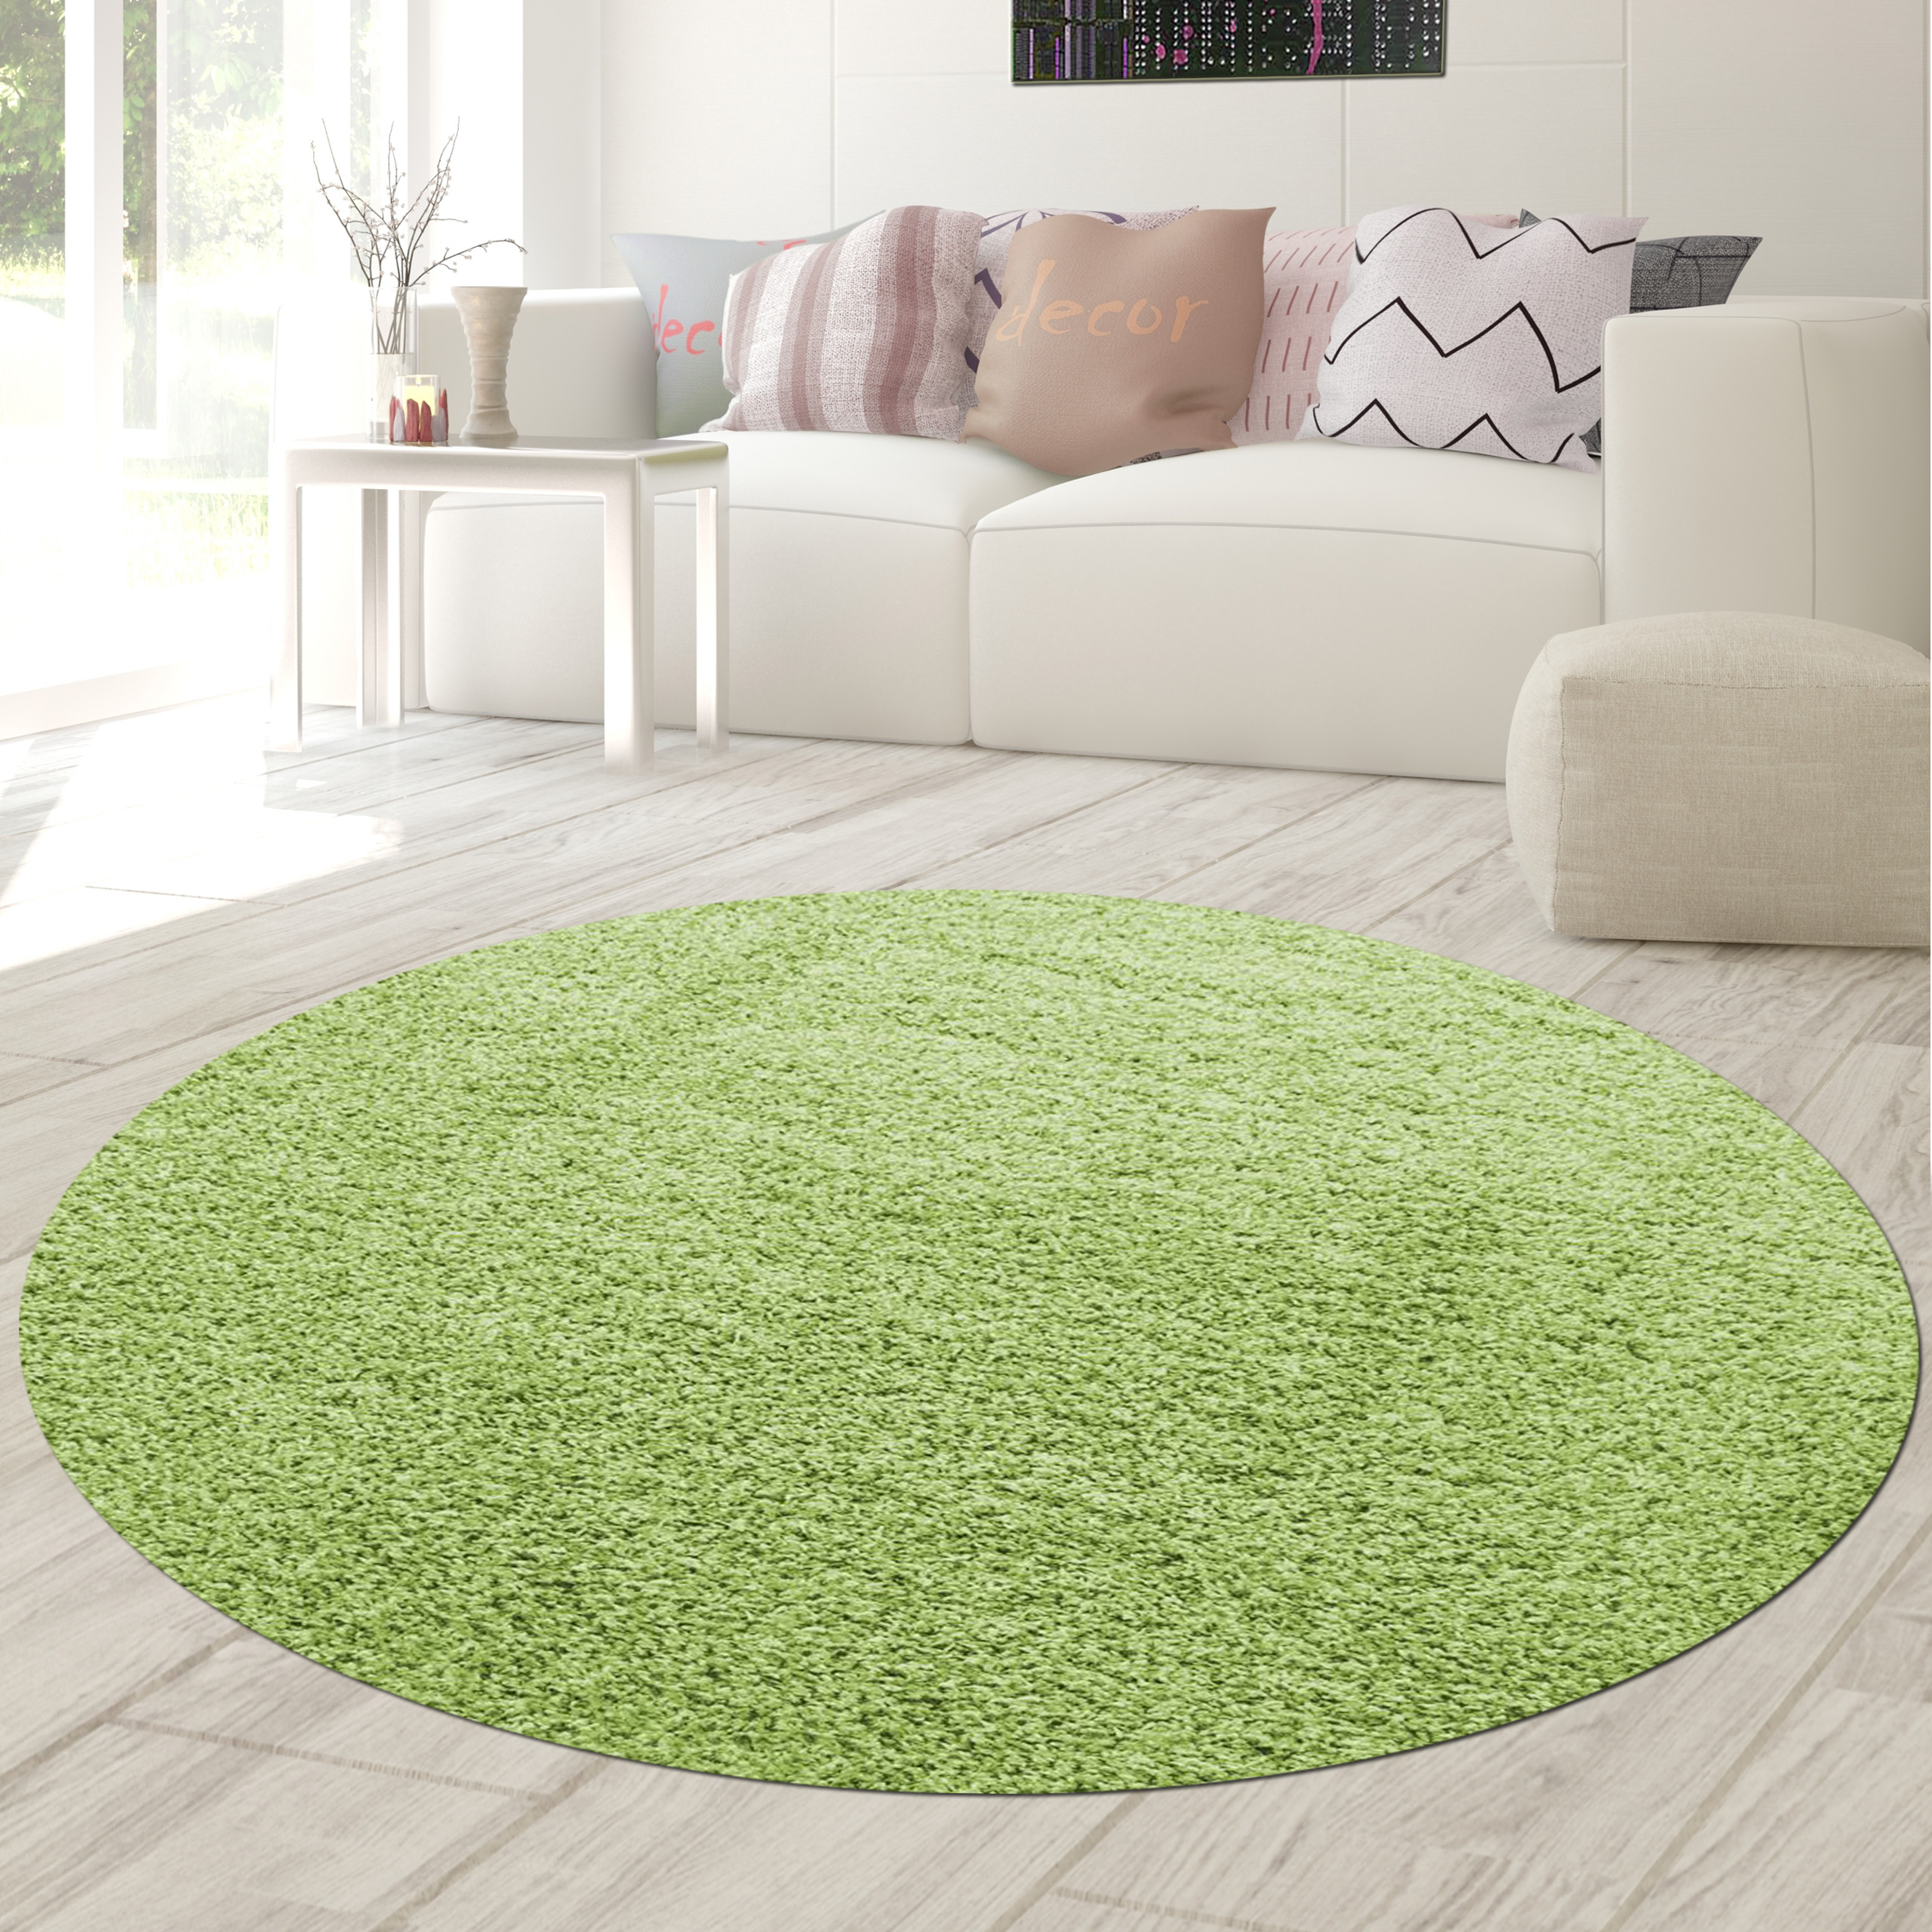 Shag carpet emission frisee, 2.2 free (approx) Merilon 30mm Teppich-Traum gr overall polypropylenes / m² - weight (approx) 100% Total height